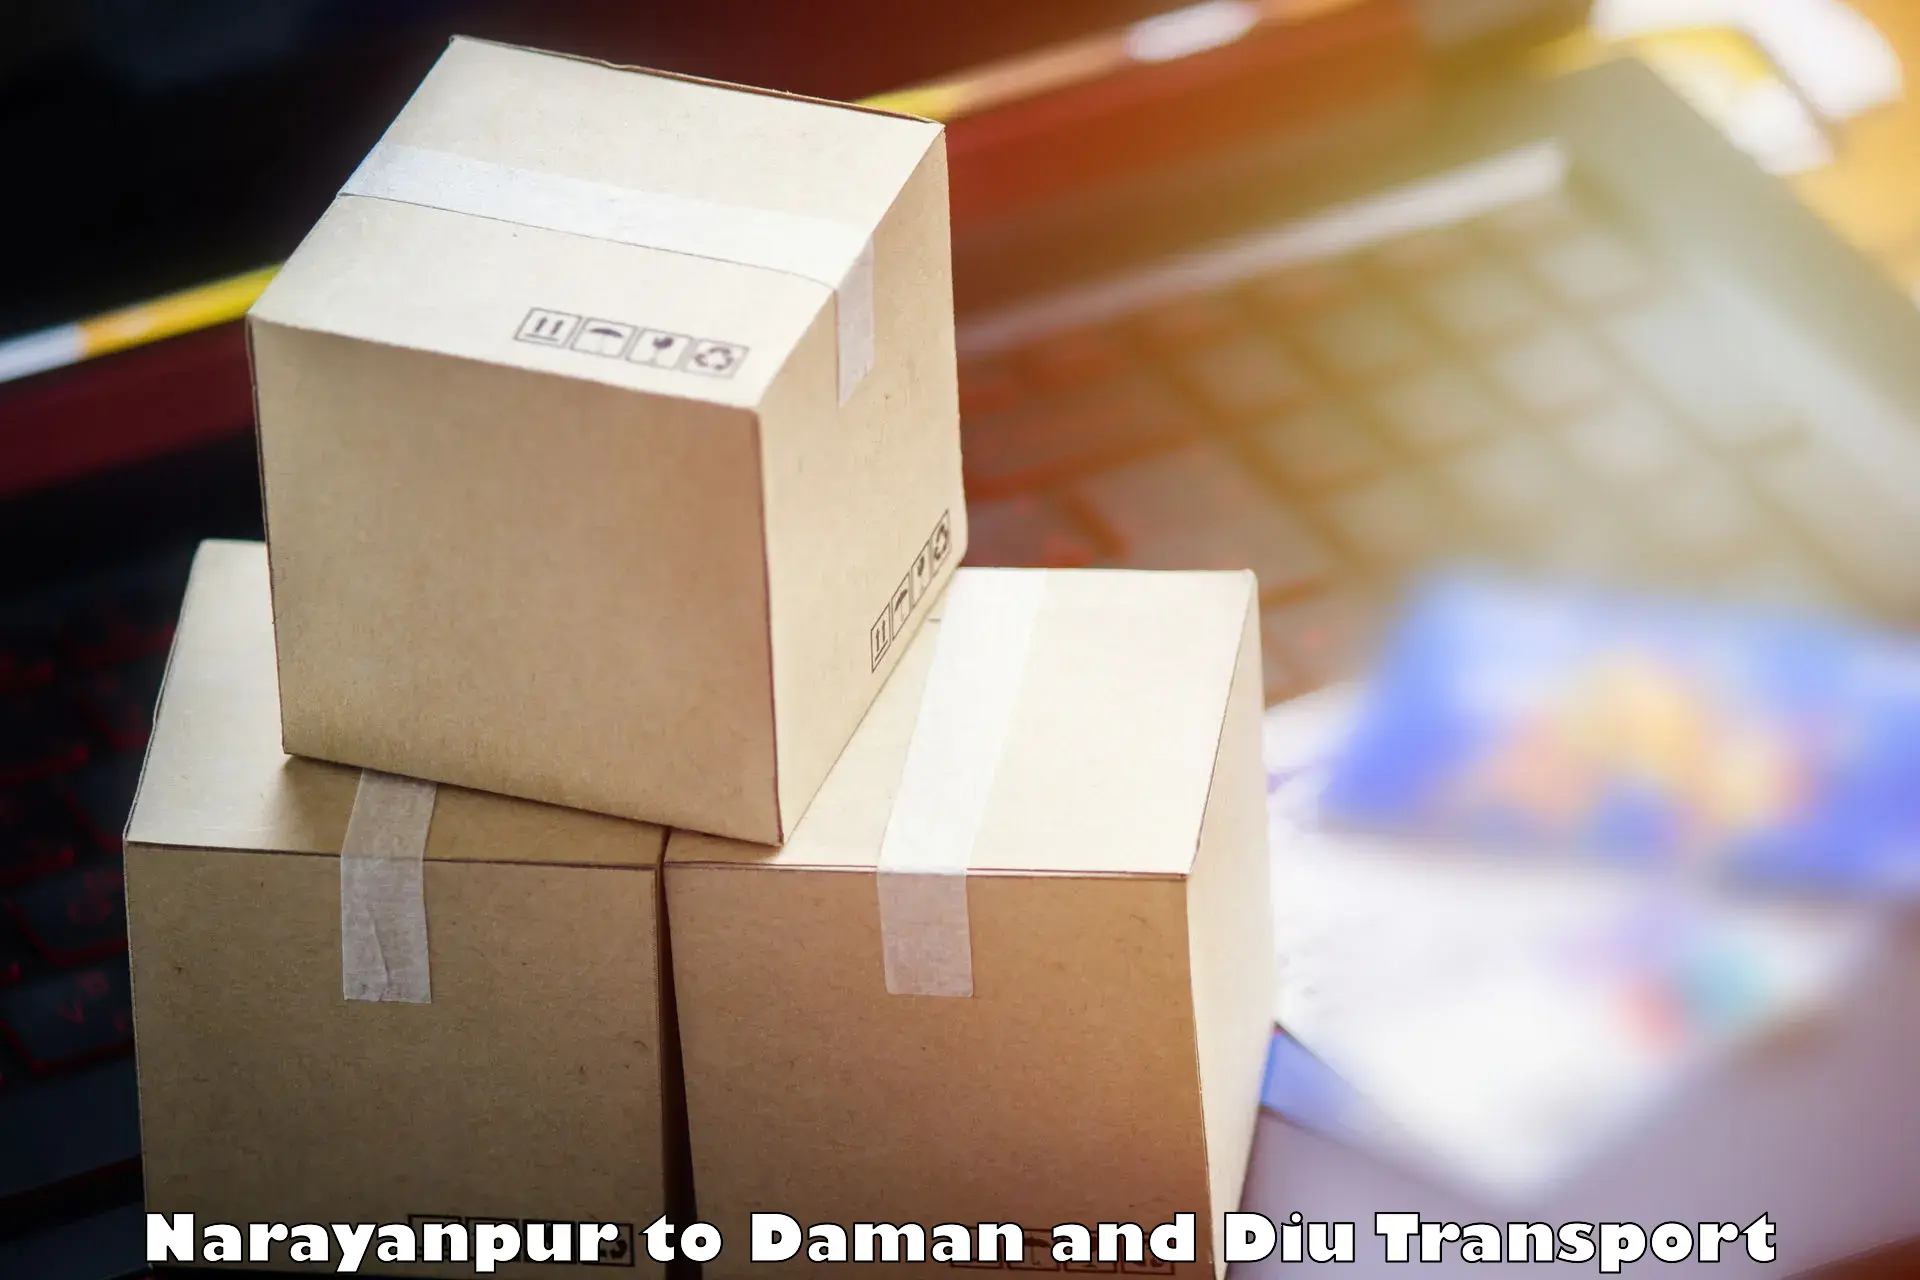 Nationwide transport services Narayanpur to Daman